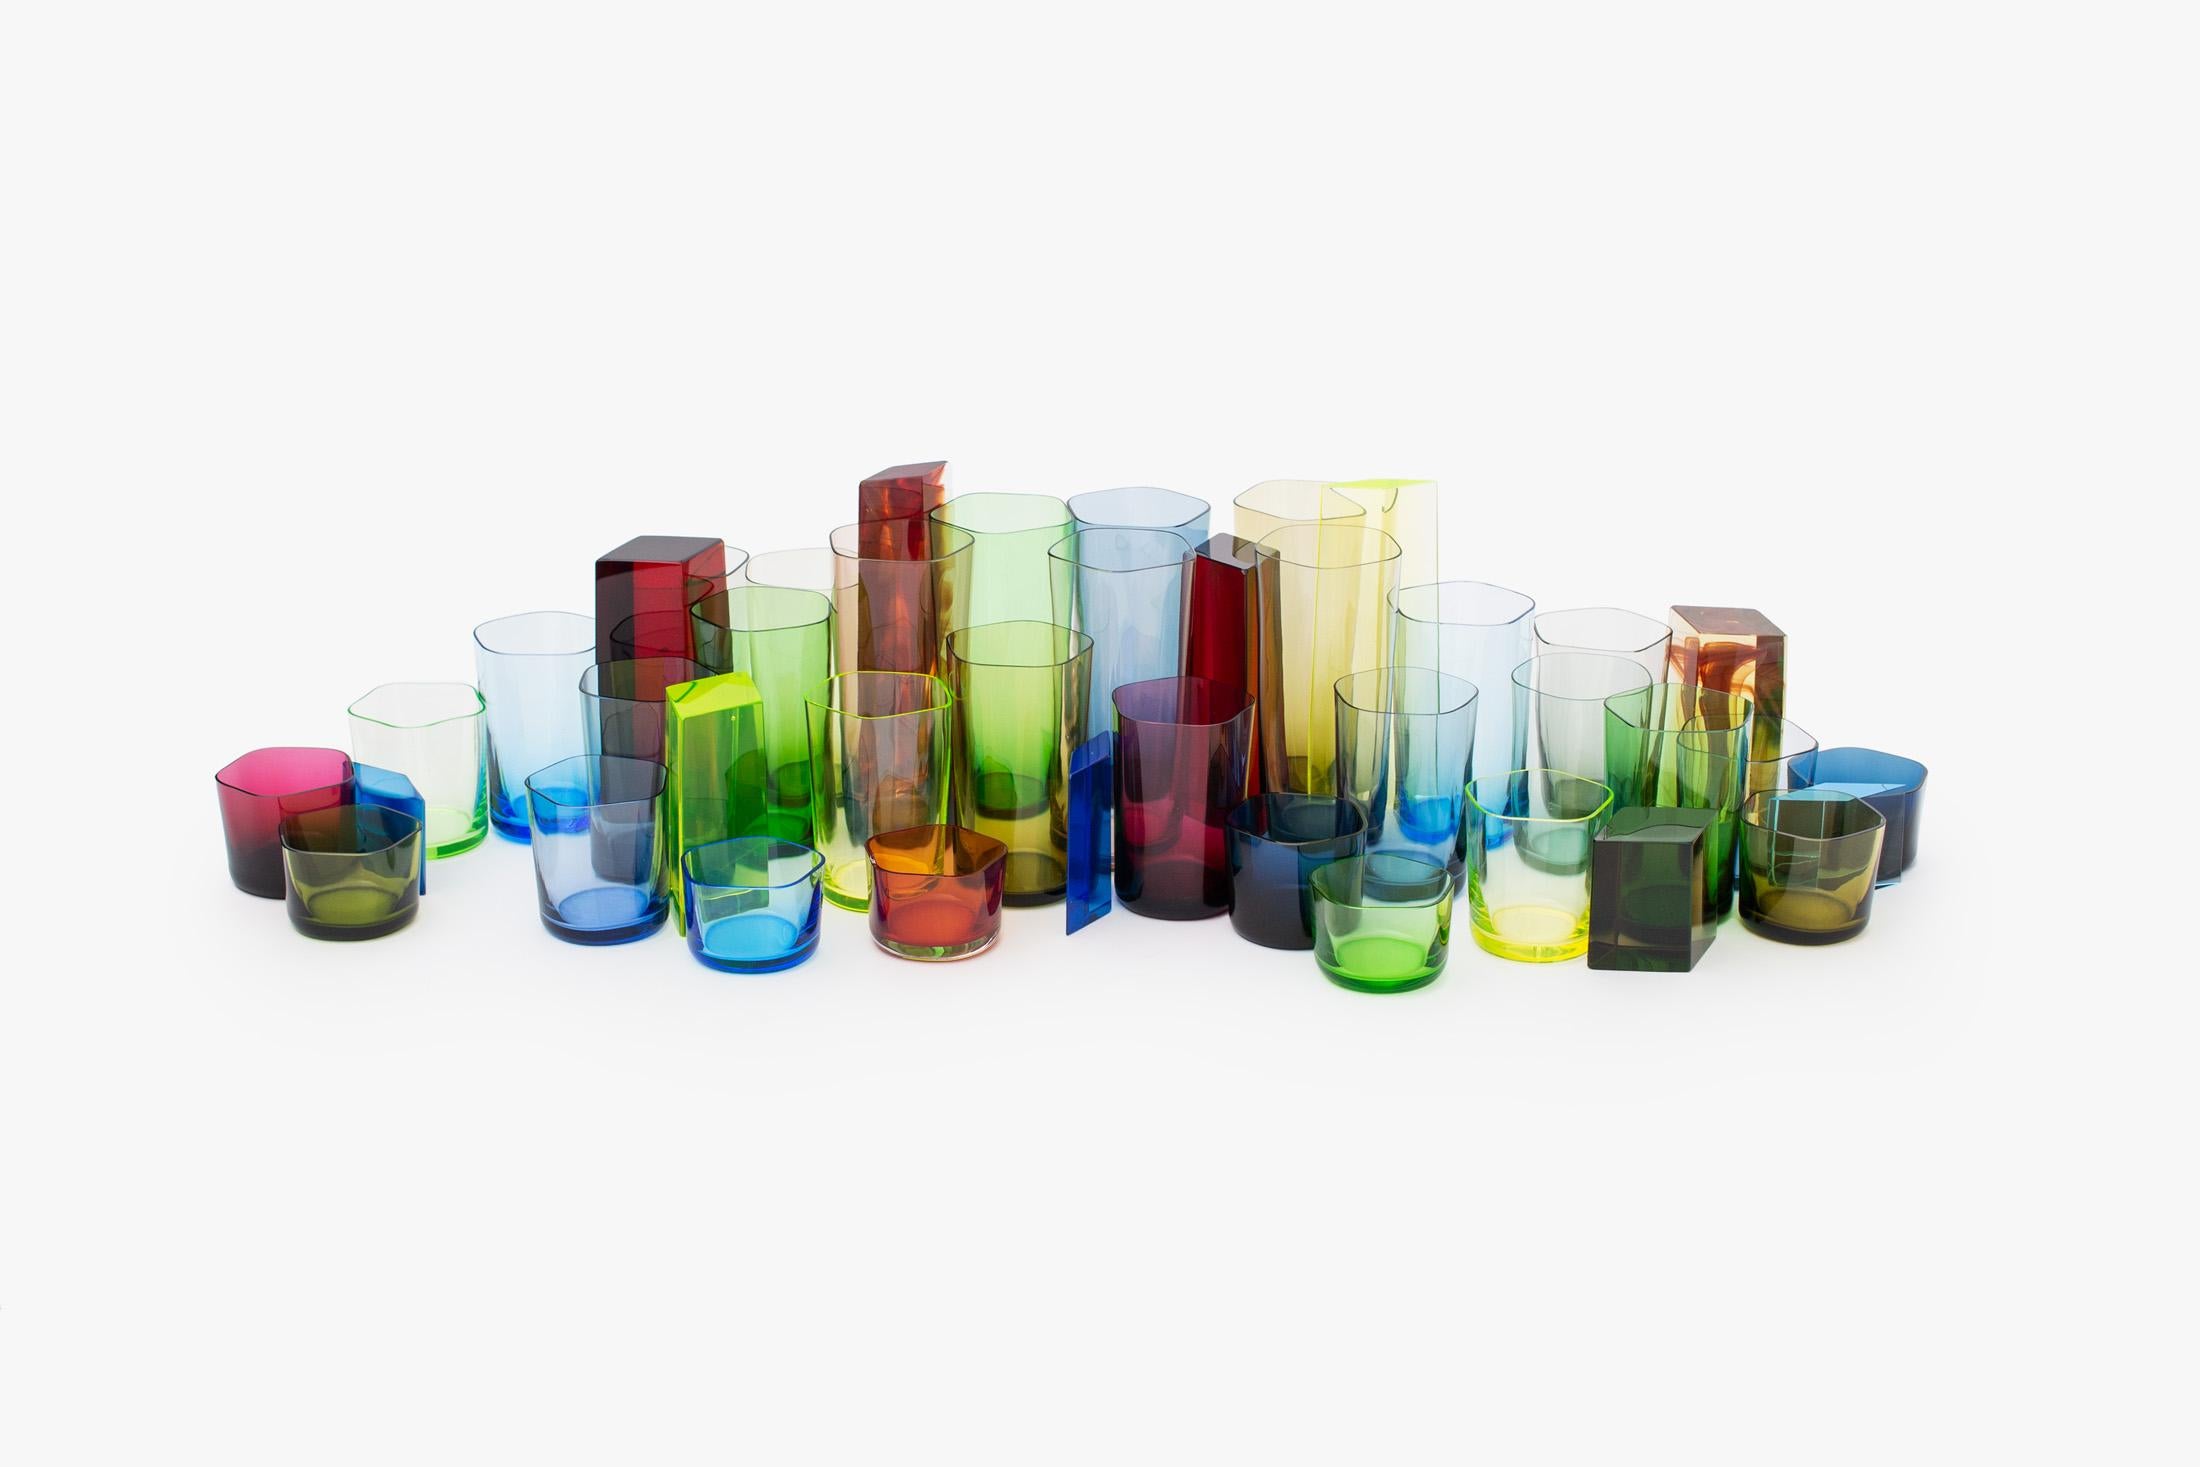 OAO Works Project 31.3 is a body of 41 individual glass elements designed to be arranged into a multiplicity of compositions. The forms of 31.3 Polygon Glassware can be traced back to two distinct sources: a mathematical query into geometric tiling